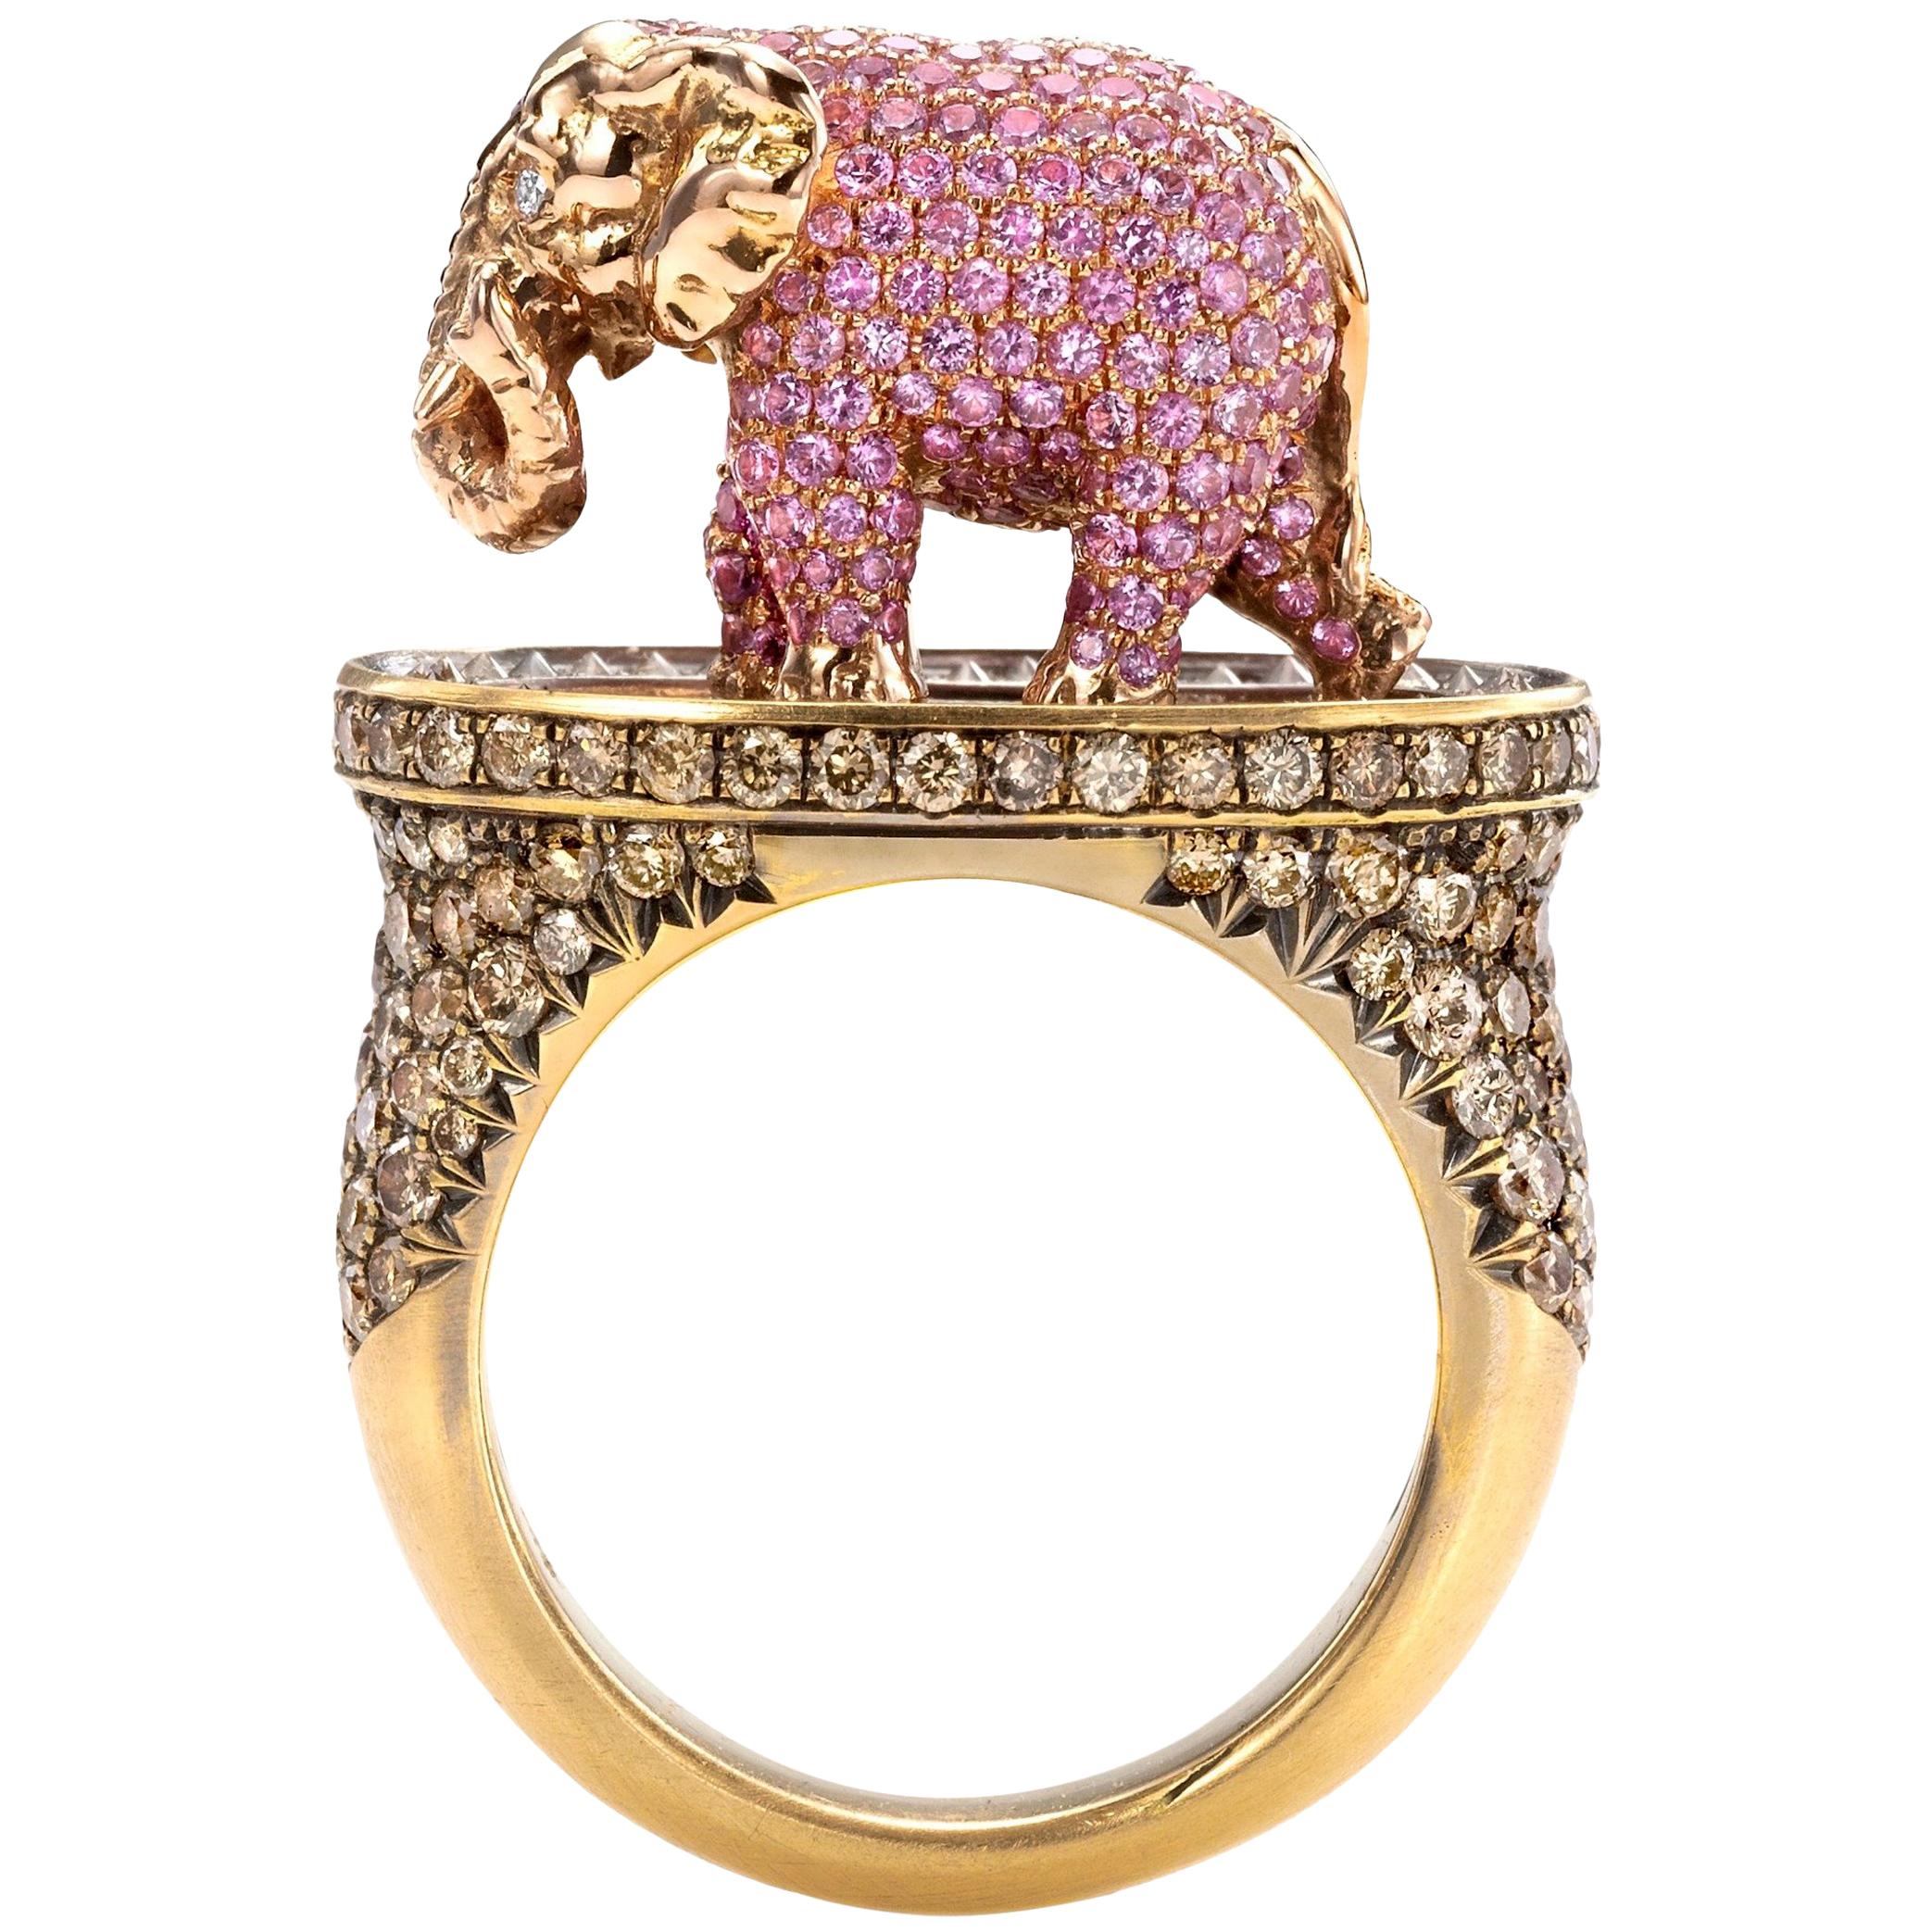 Wendy Brandes 2 TCW Pink Sapphire Elephant Ring in 18K Gold With Brown Diamonds